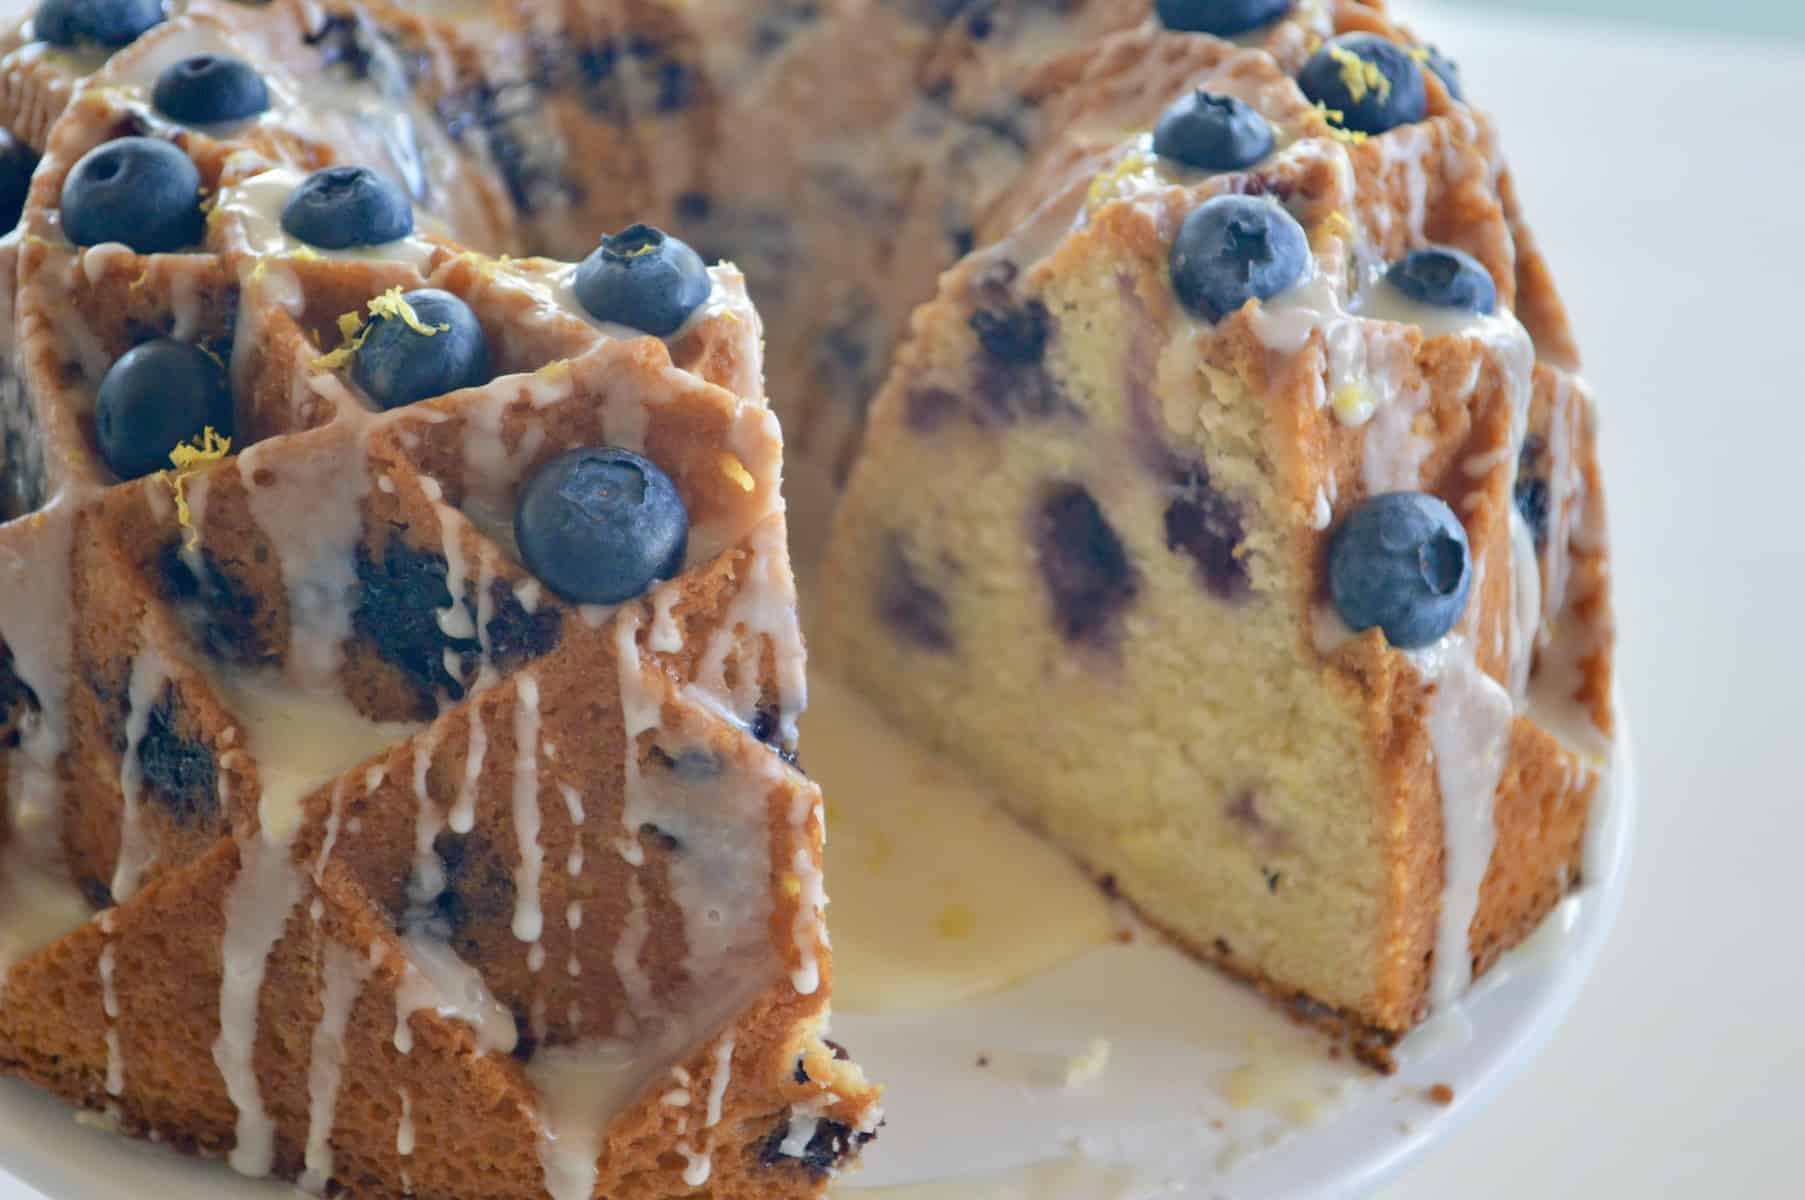 Blueberry Lemon Bundt Cake baked in a Jubilee Pan and garnished with blueberries and honey lemon drizzle